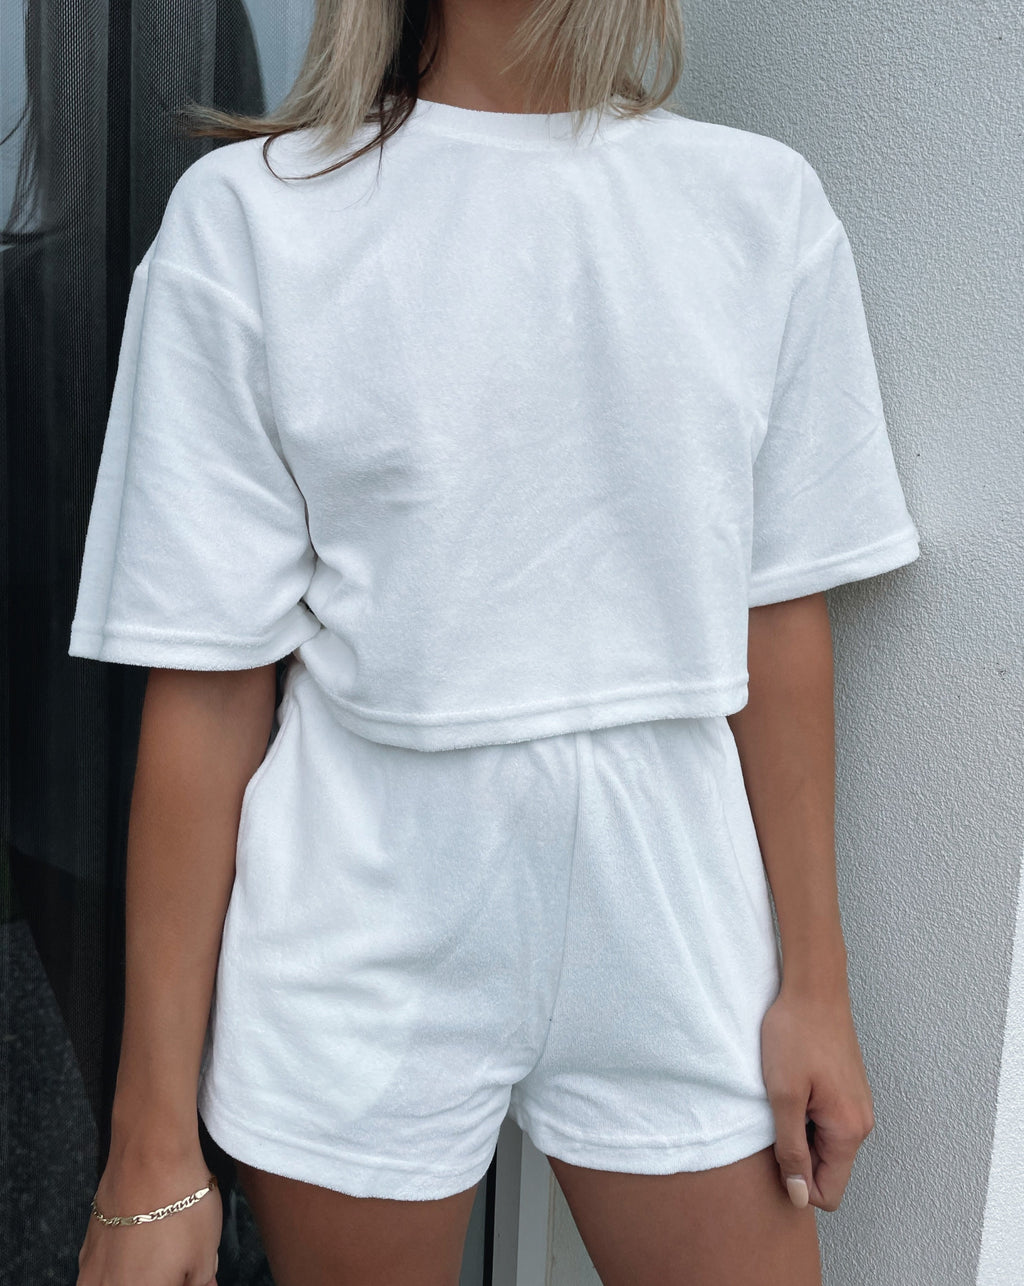 terry toweling set, white, two piece, summer outfit, resort, beach